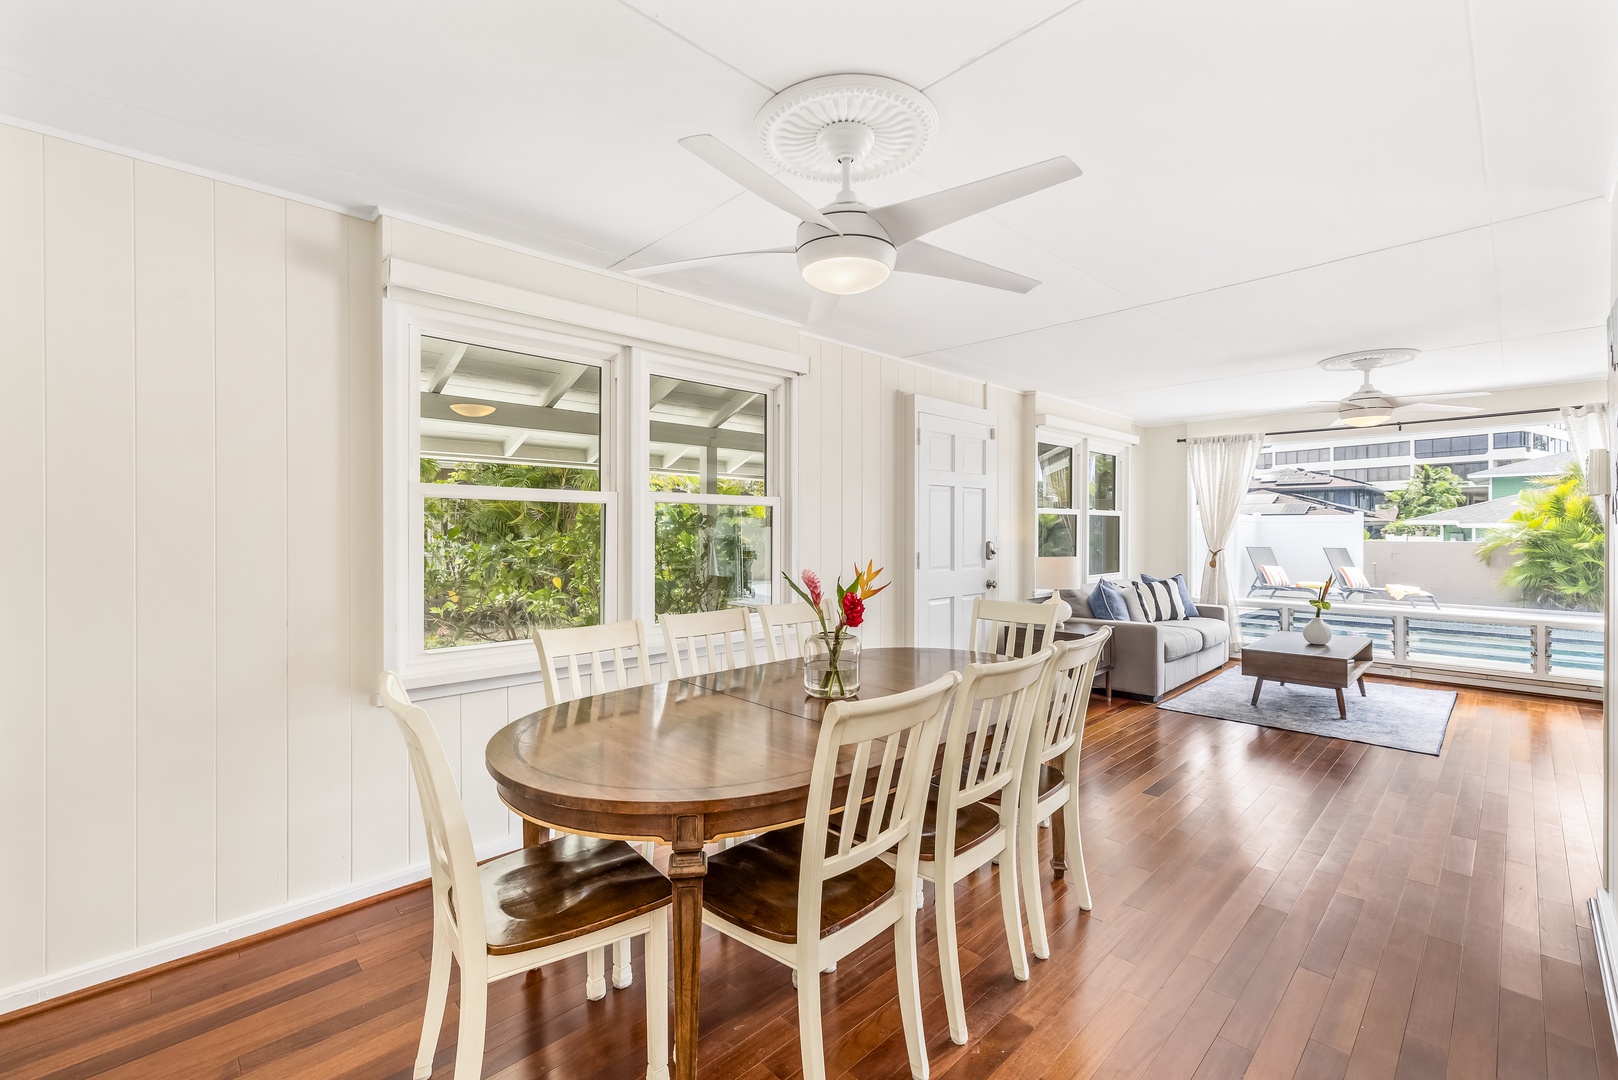 Honolulu Vacation Rentals, Kahala Cottage - Enjoy your meals on the dining area.